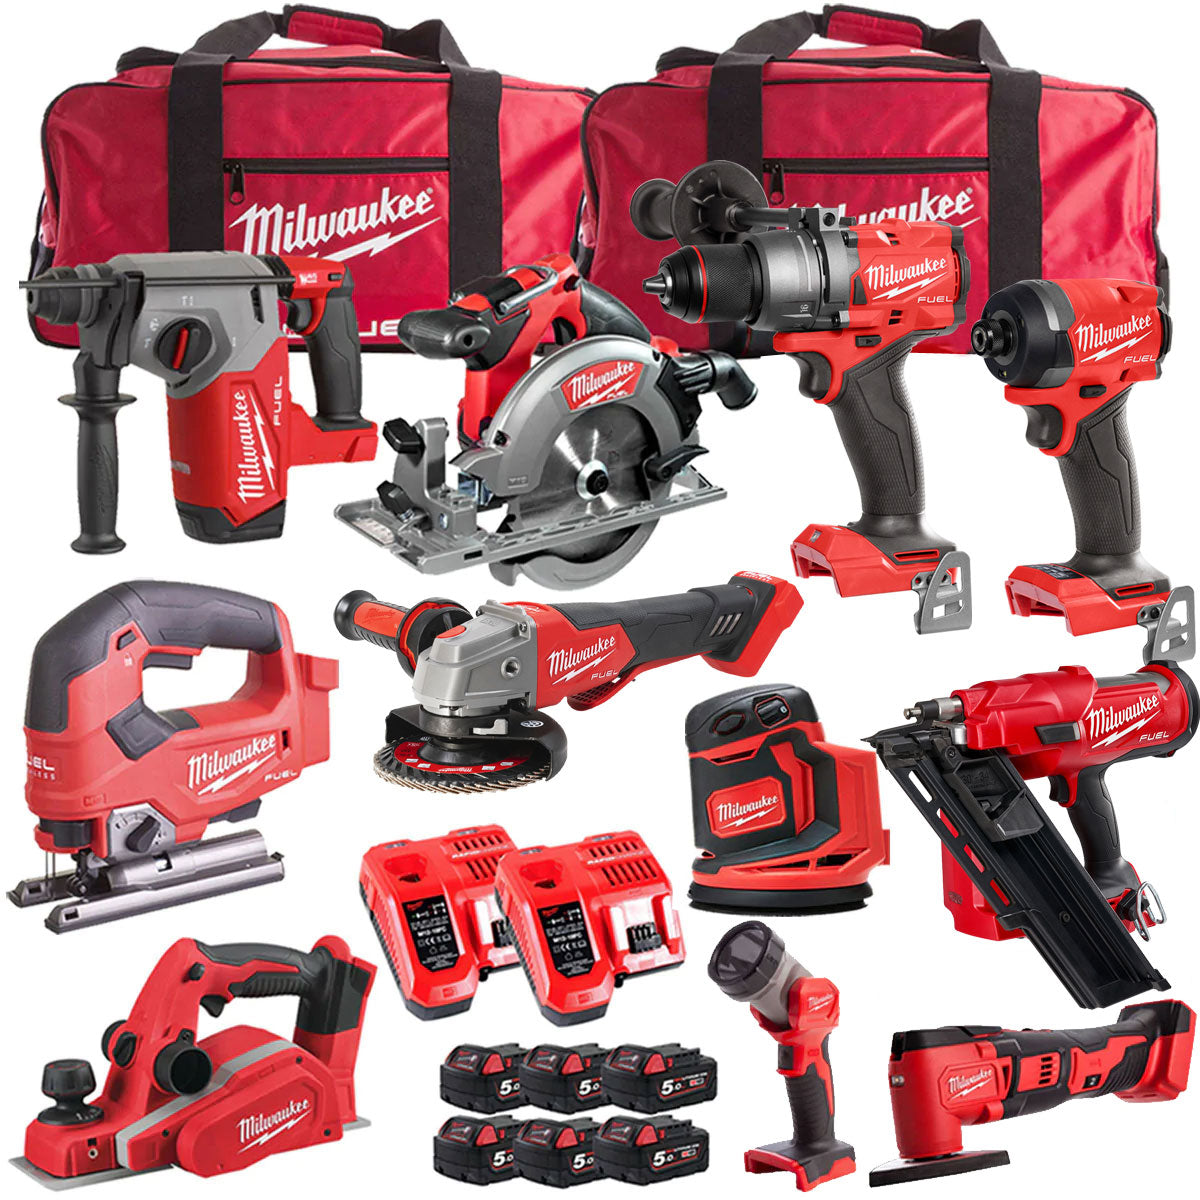 Milwaukee 18V Cordless 11 Piece Tool Kit with 6 x 5.0Ah Batteries & Charger in Bag T4TKIT-511